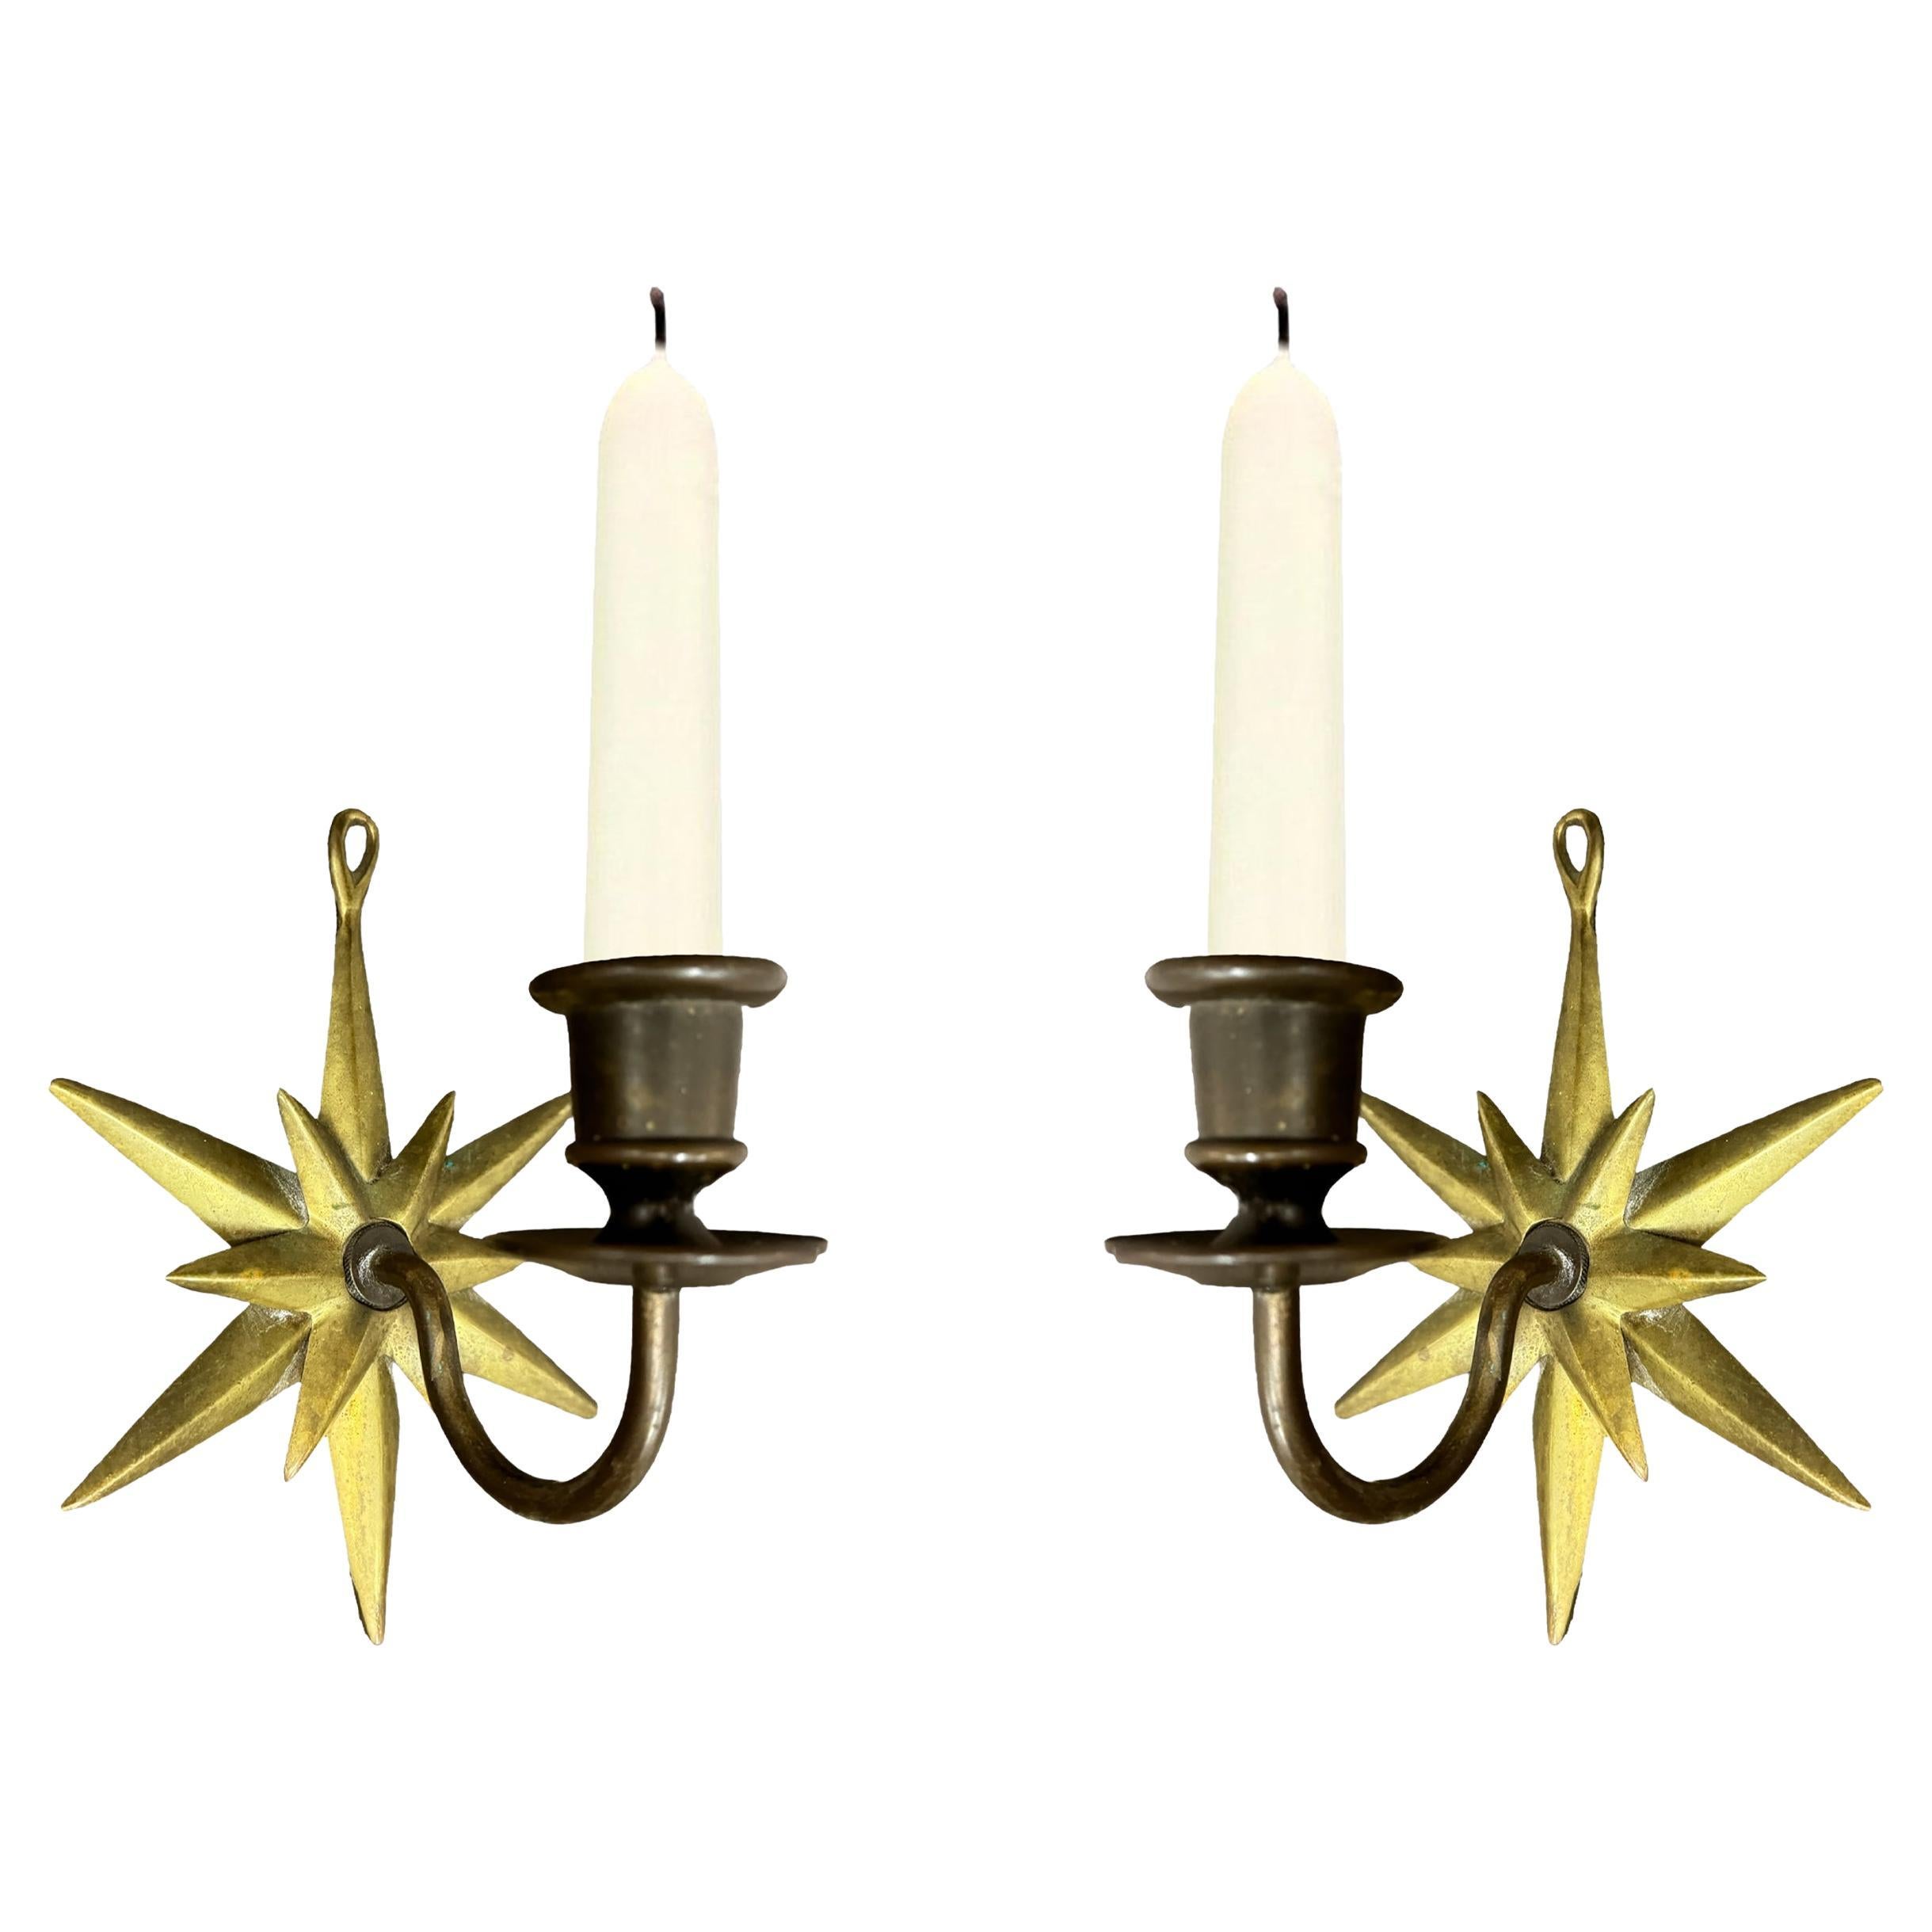 Pair of Early 20th Century French Bronze Candle Sconces